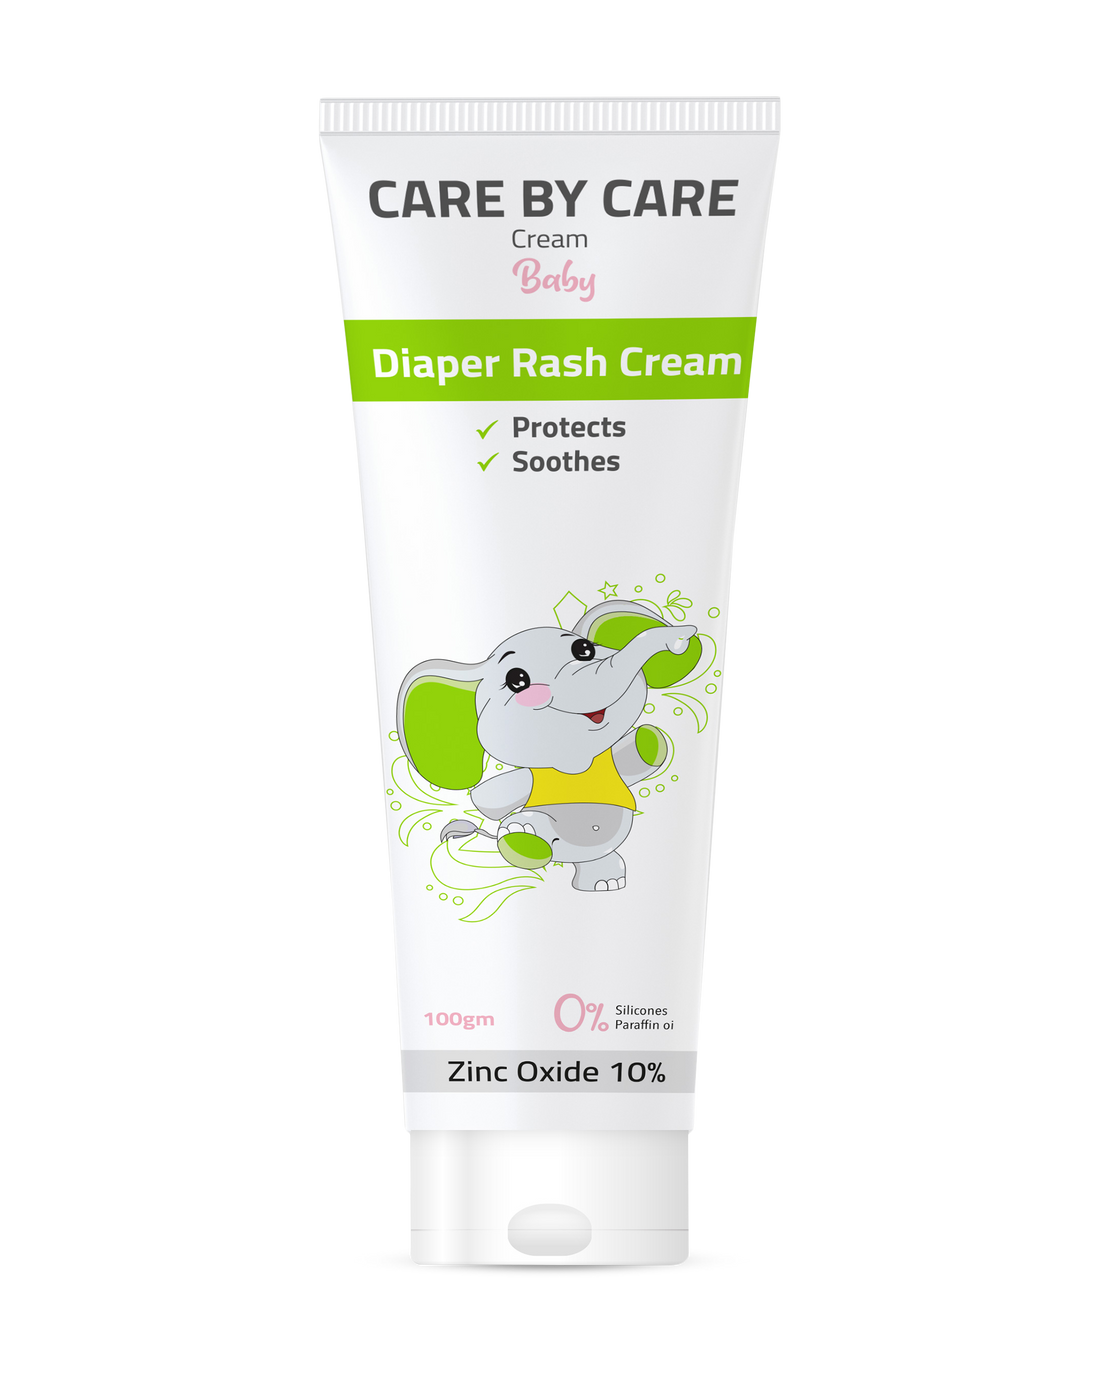 Care by Care baby Cream 100gm